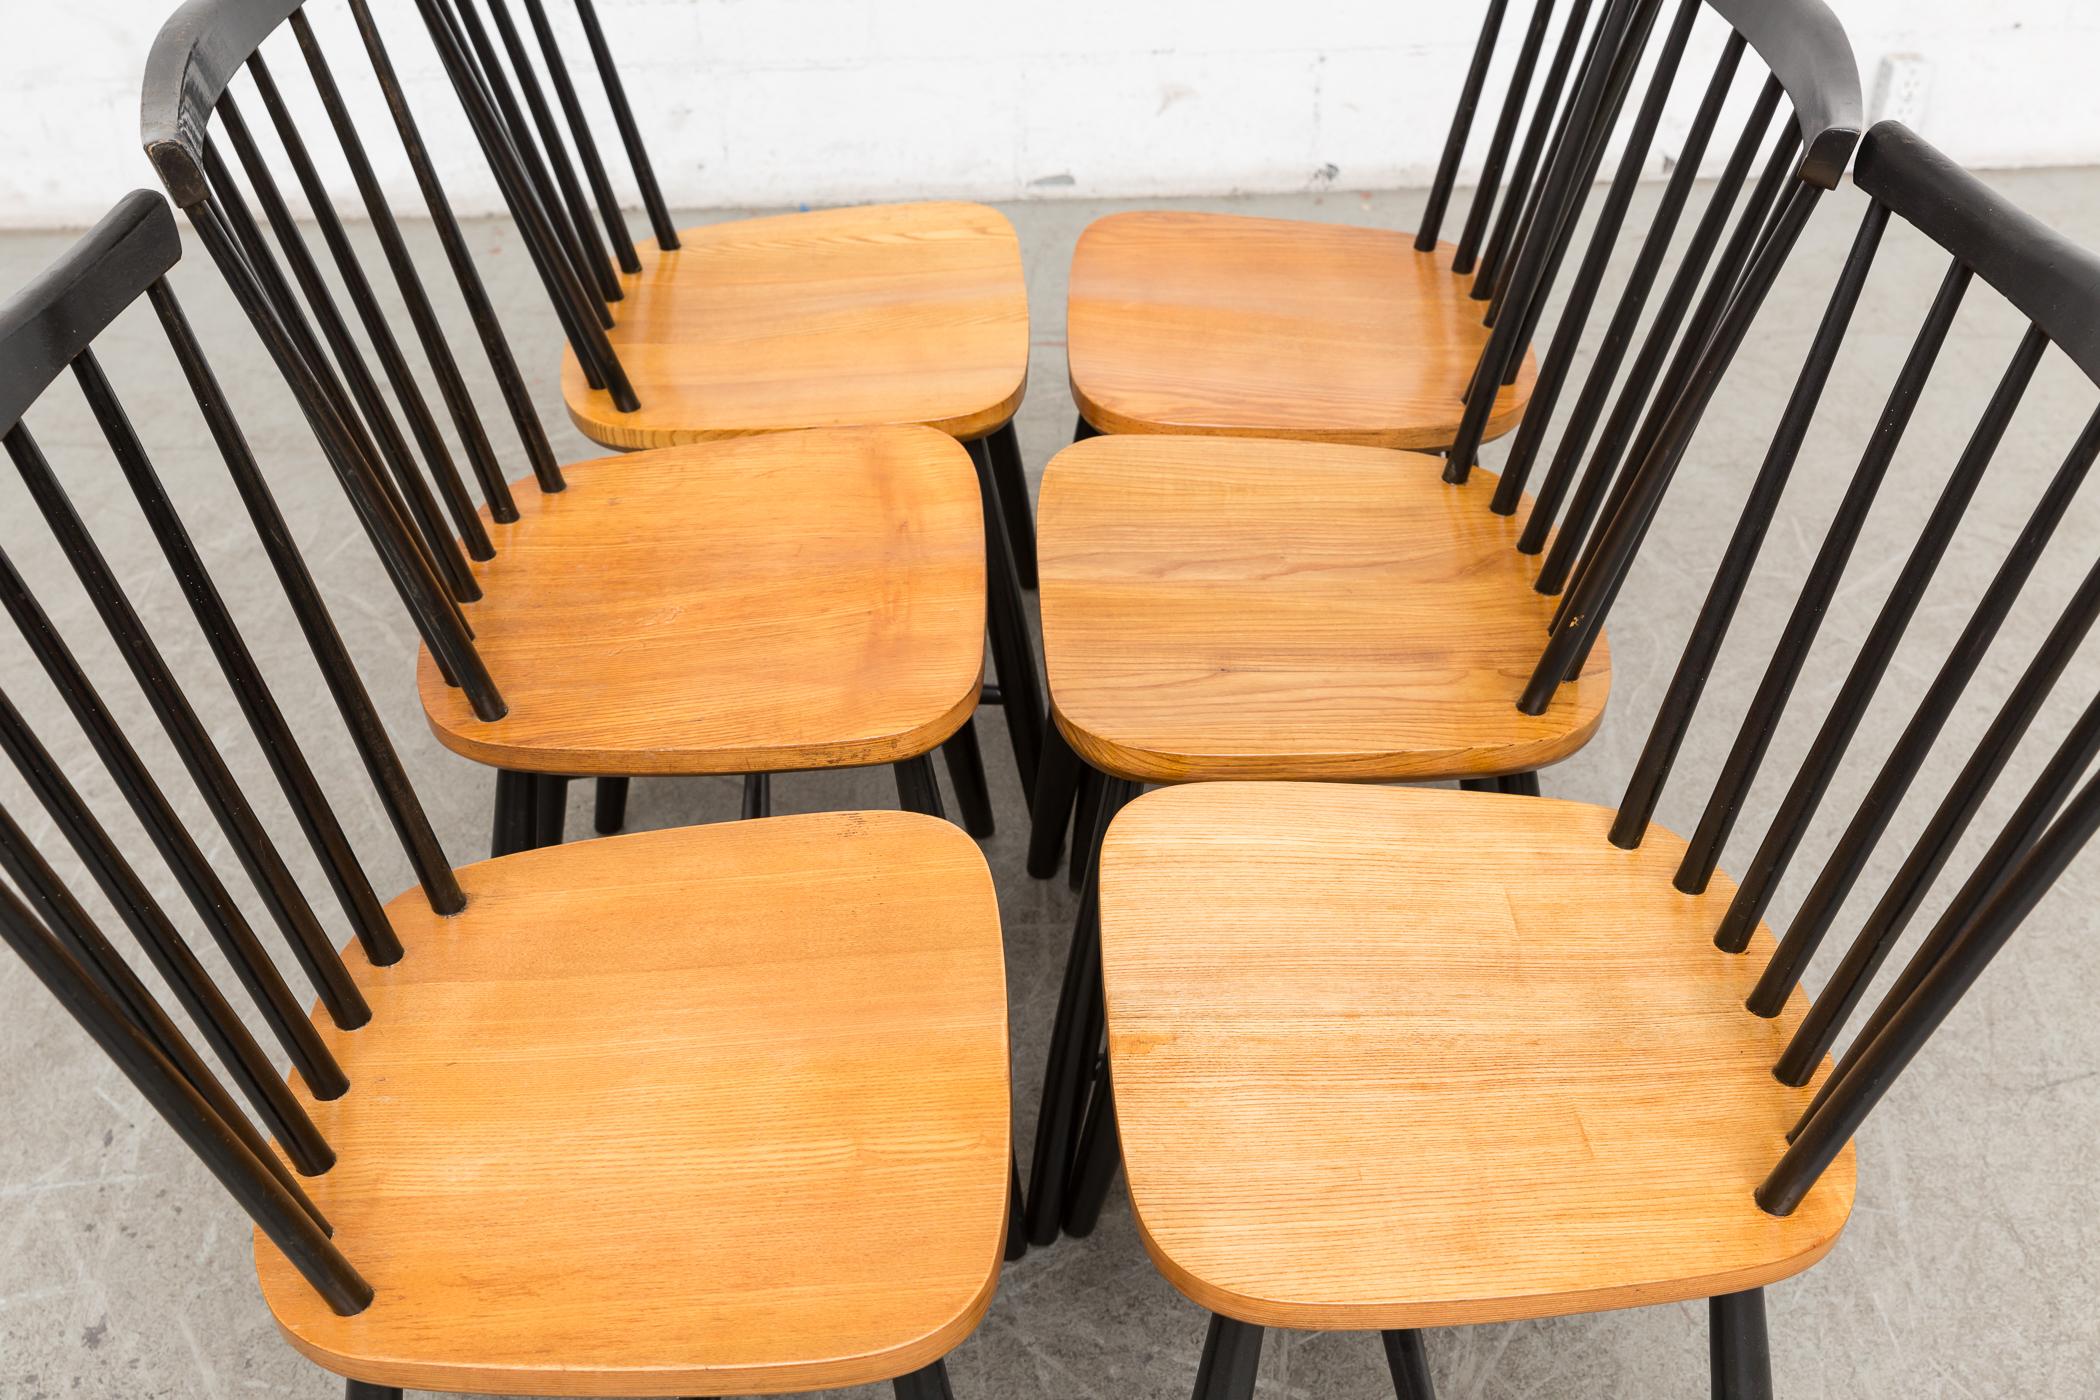 Set of six matching Tapiovaara style spindle back side chairs with black lacquered wood and lightly refinished teak seats.